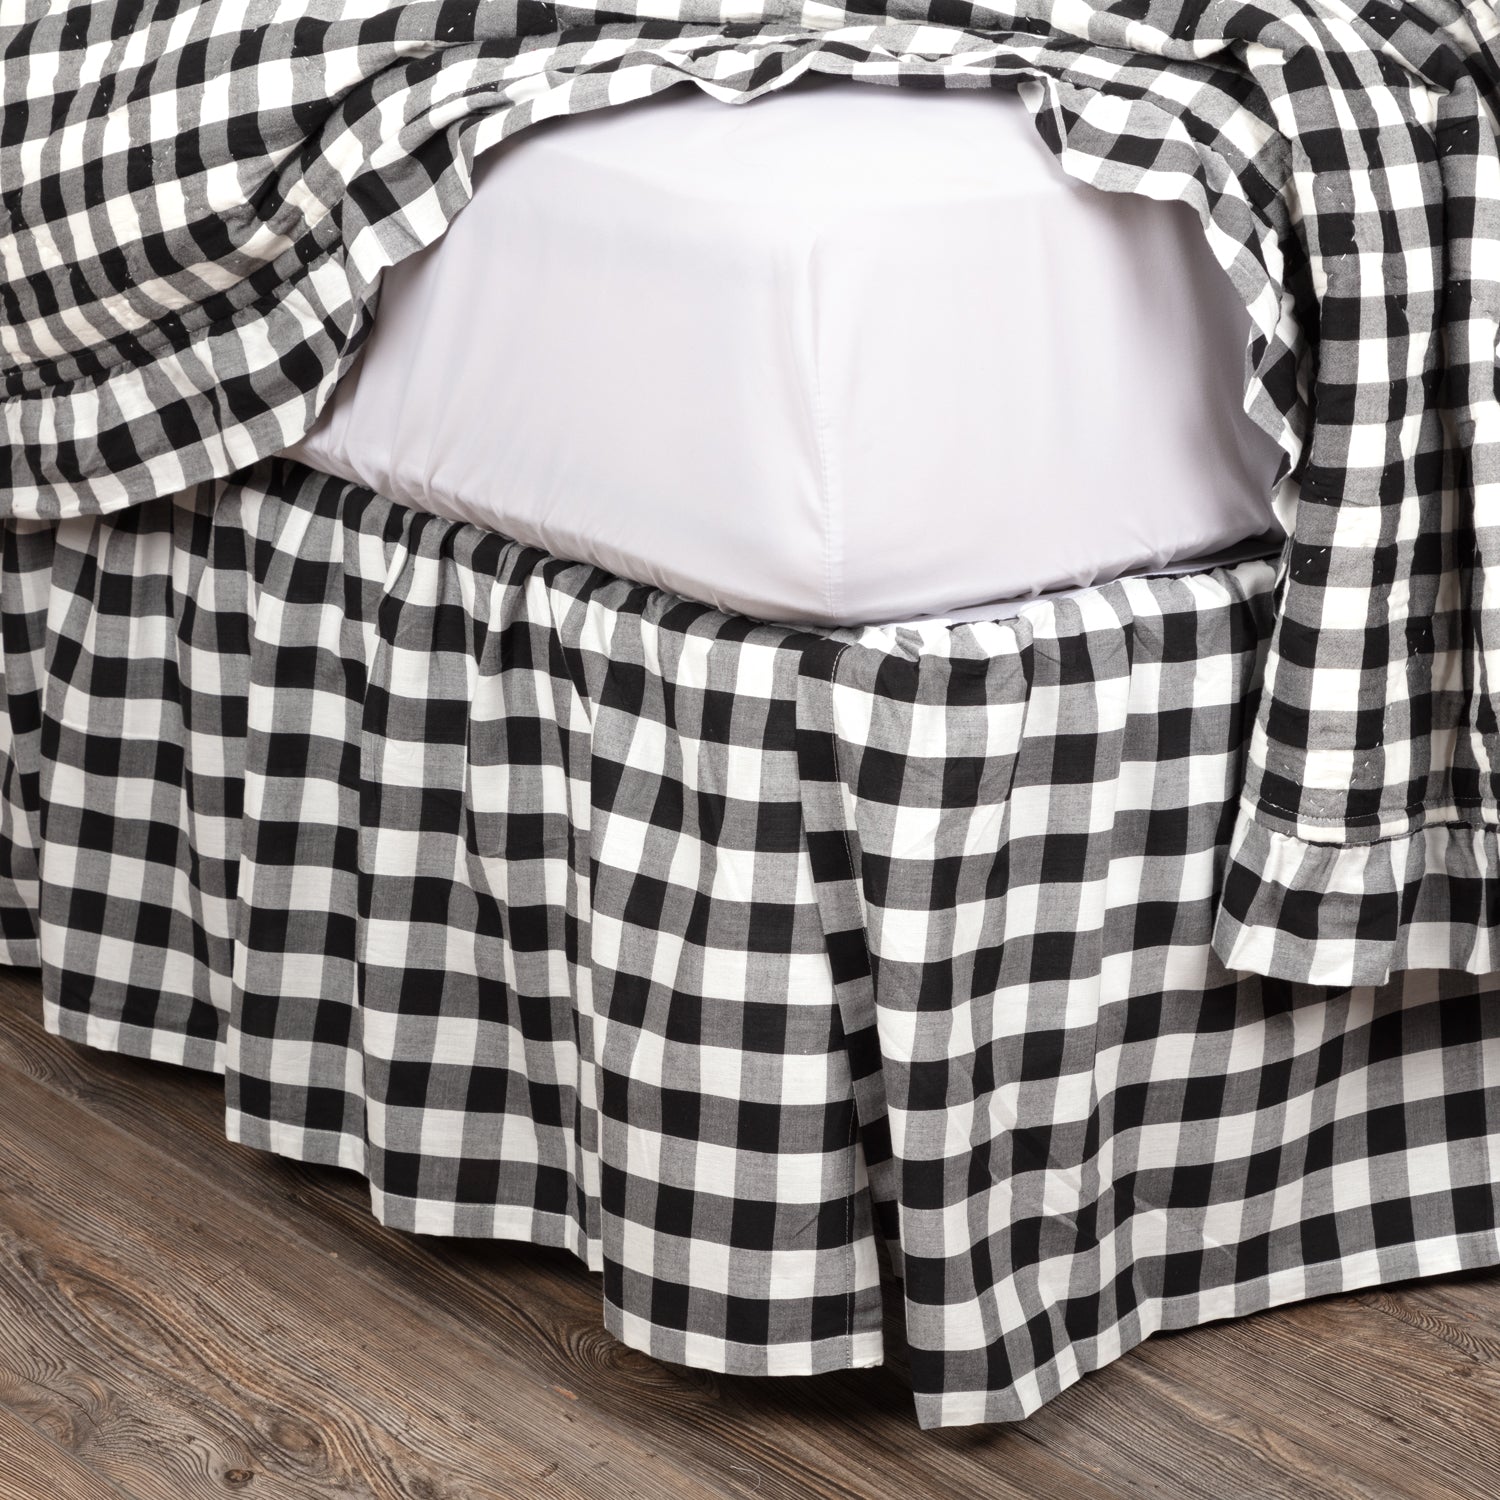 April & Olive Annie Buffalo Black Check Queen Bed Skirt 60x80x16 By VHC Brands